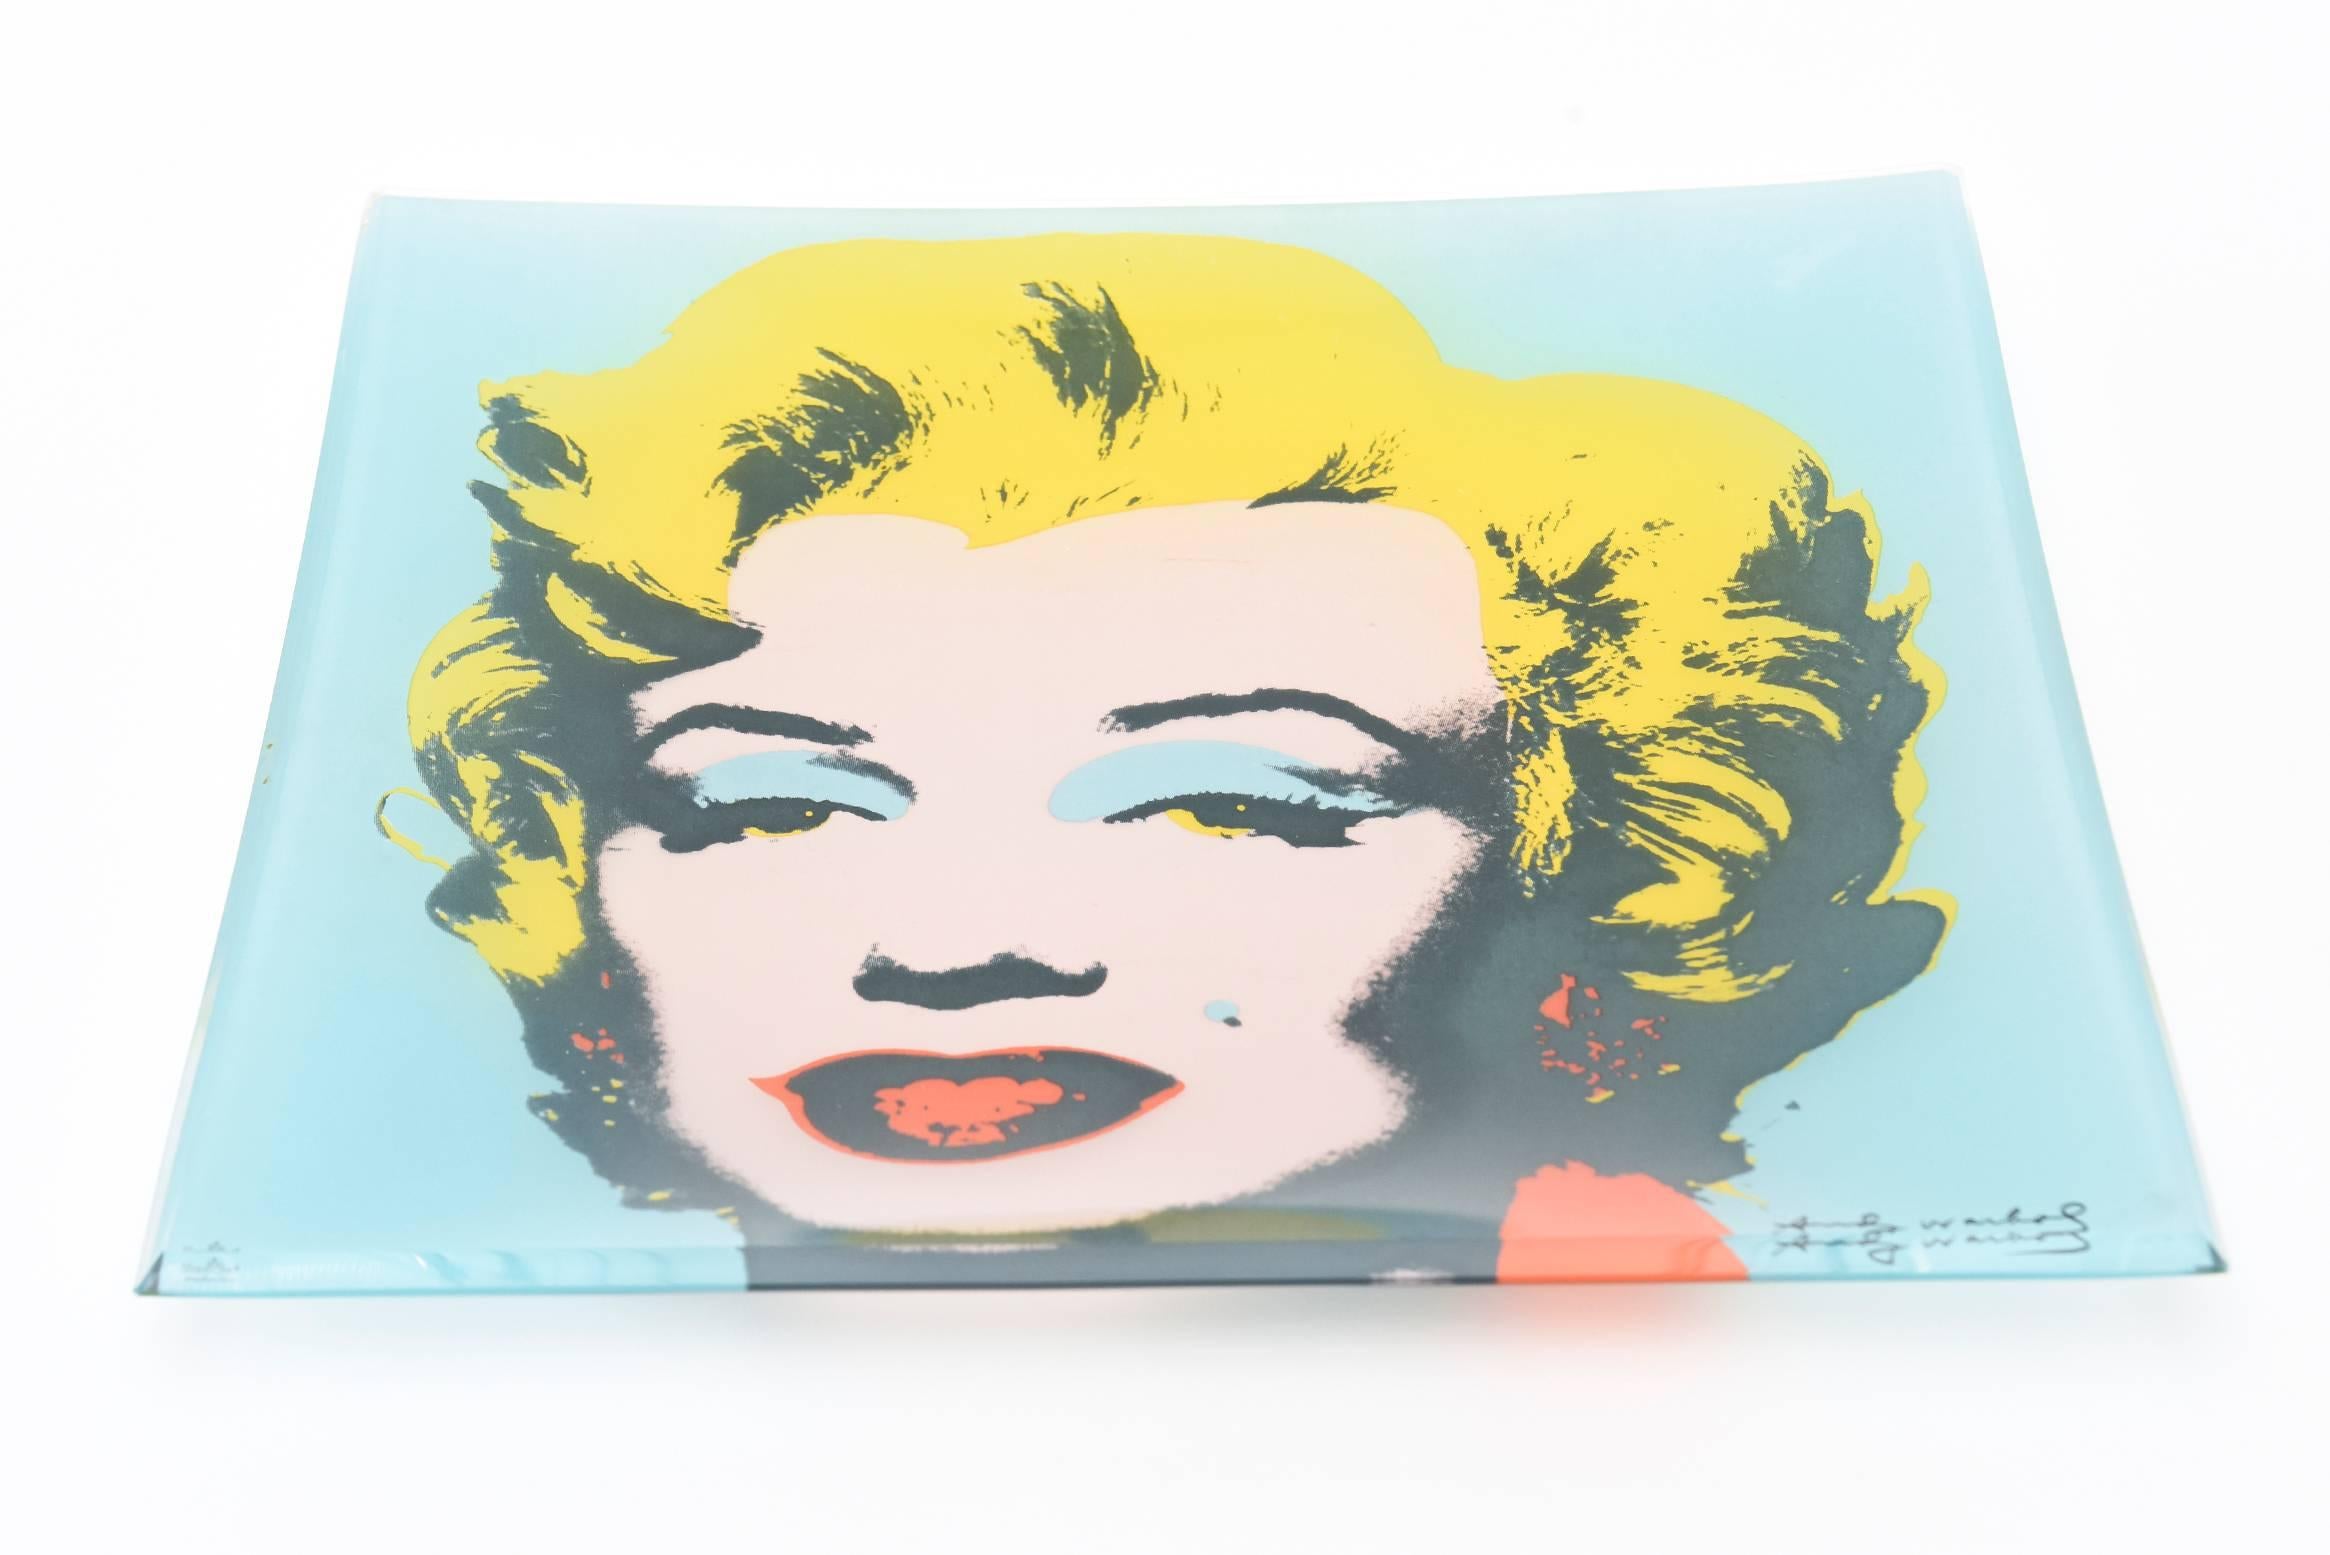 This wonderful square glass Andy Warhol for Rosenthal Marilyn glass tray/bowl/dish/plate needs not further ado. The Marilyn image is one of Warhol's most coveted. This was originally done in a large edition in the 1980s from Rosenthal Studio Line in